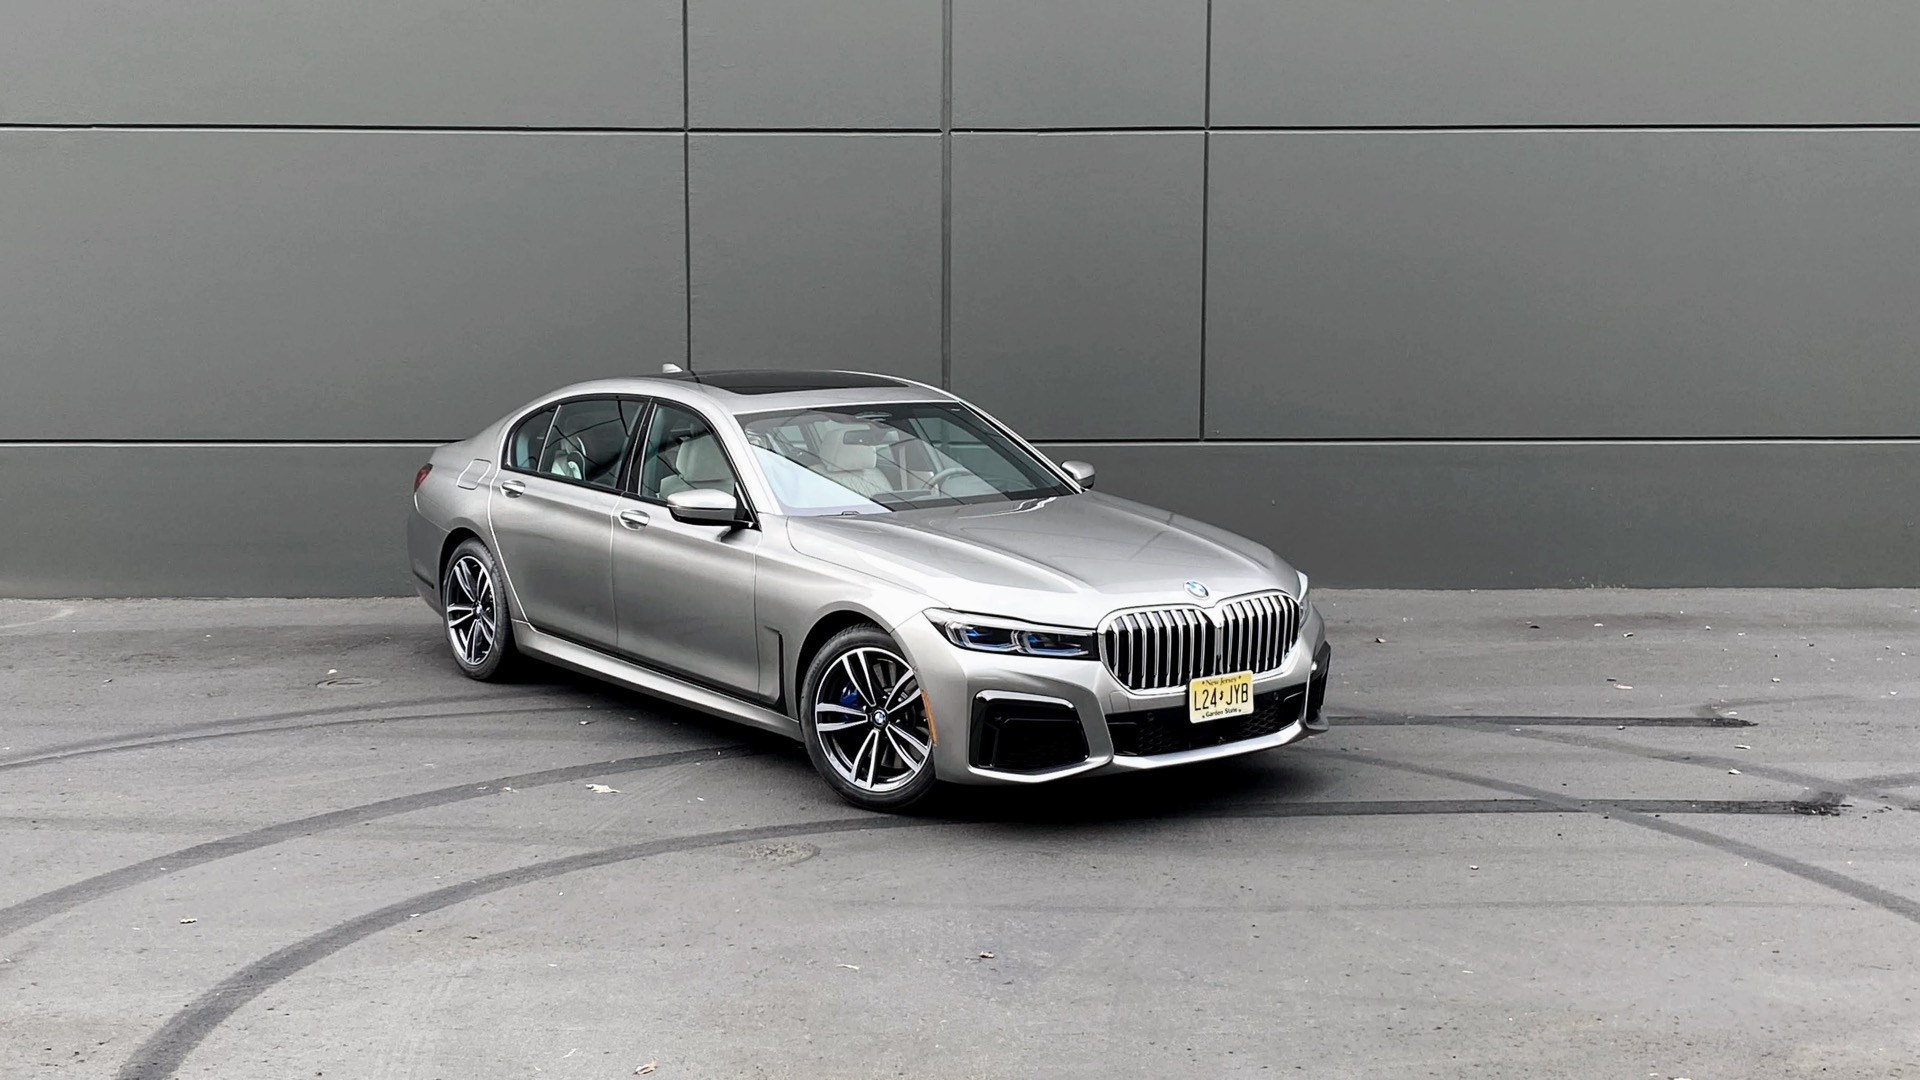 First drive review: 2020 BMW 745e plug-in hybrid luxury sedan goes your own  way, all so posh